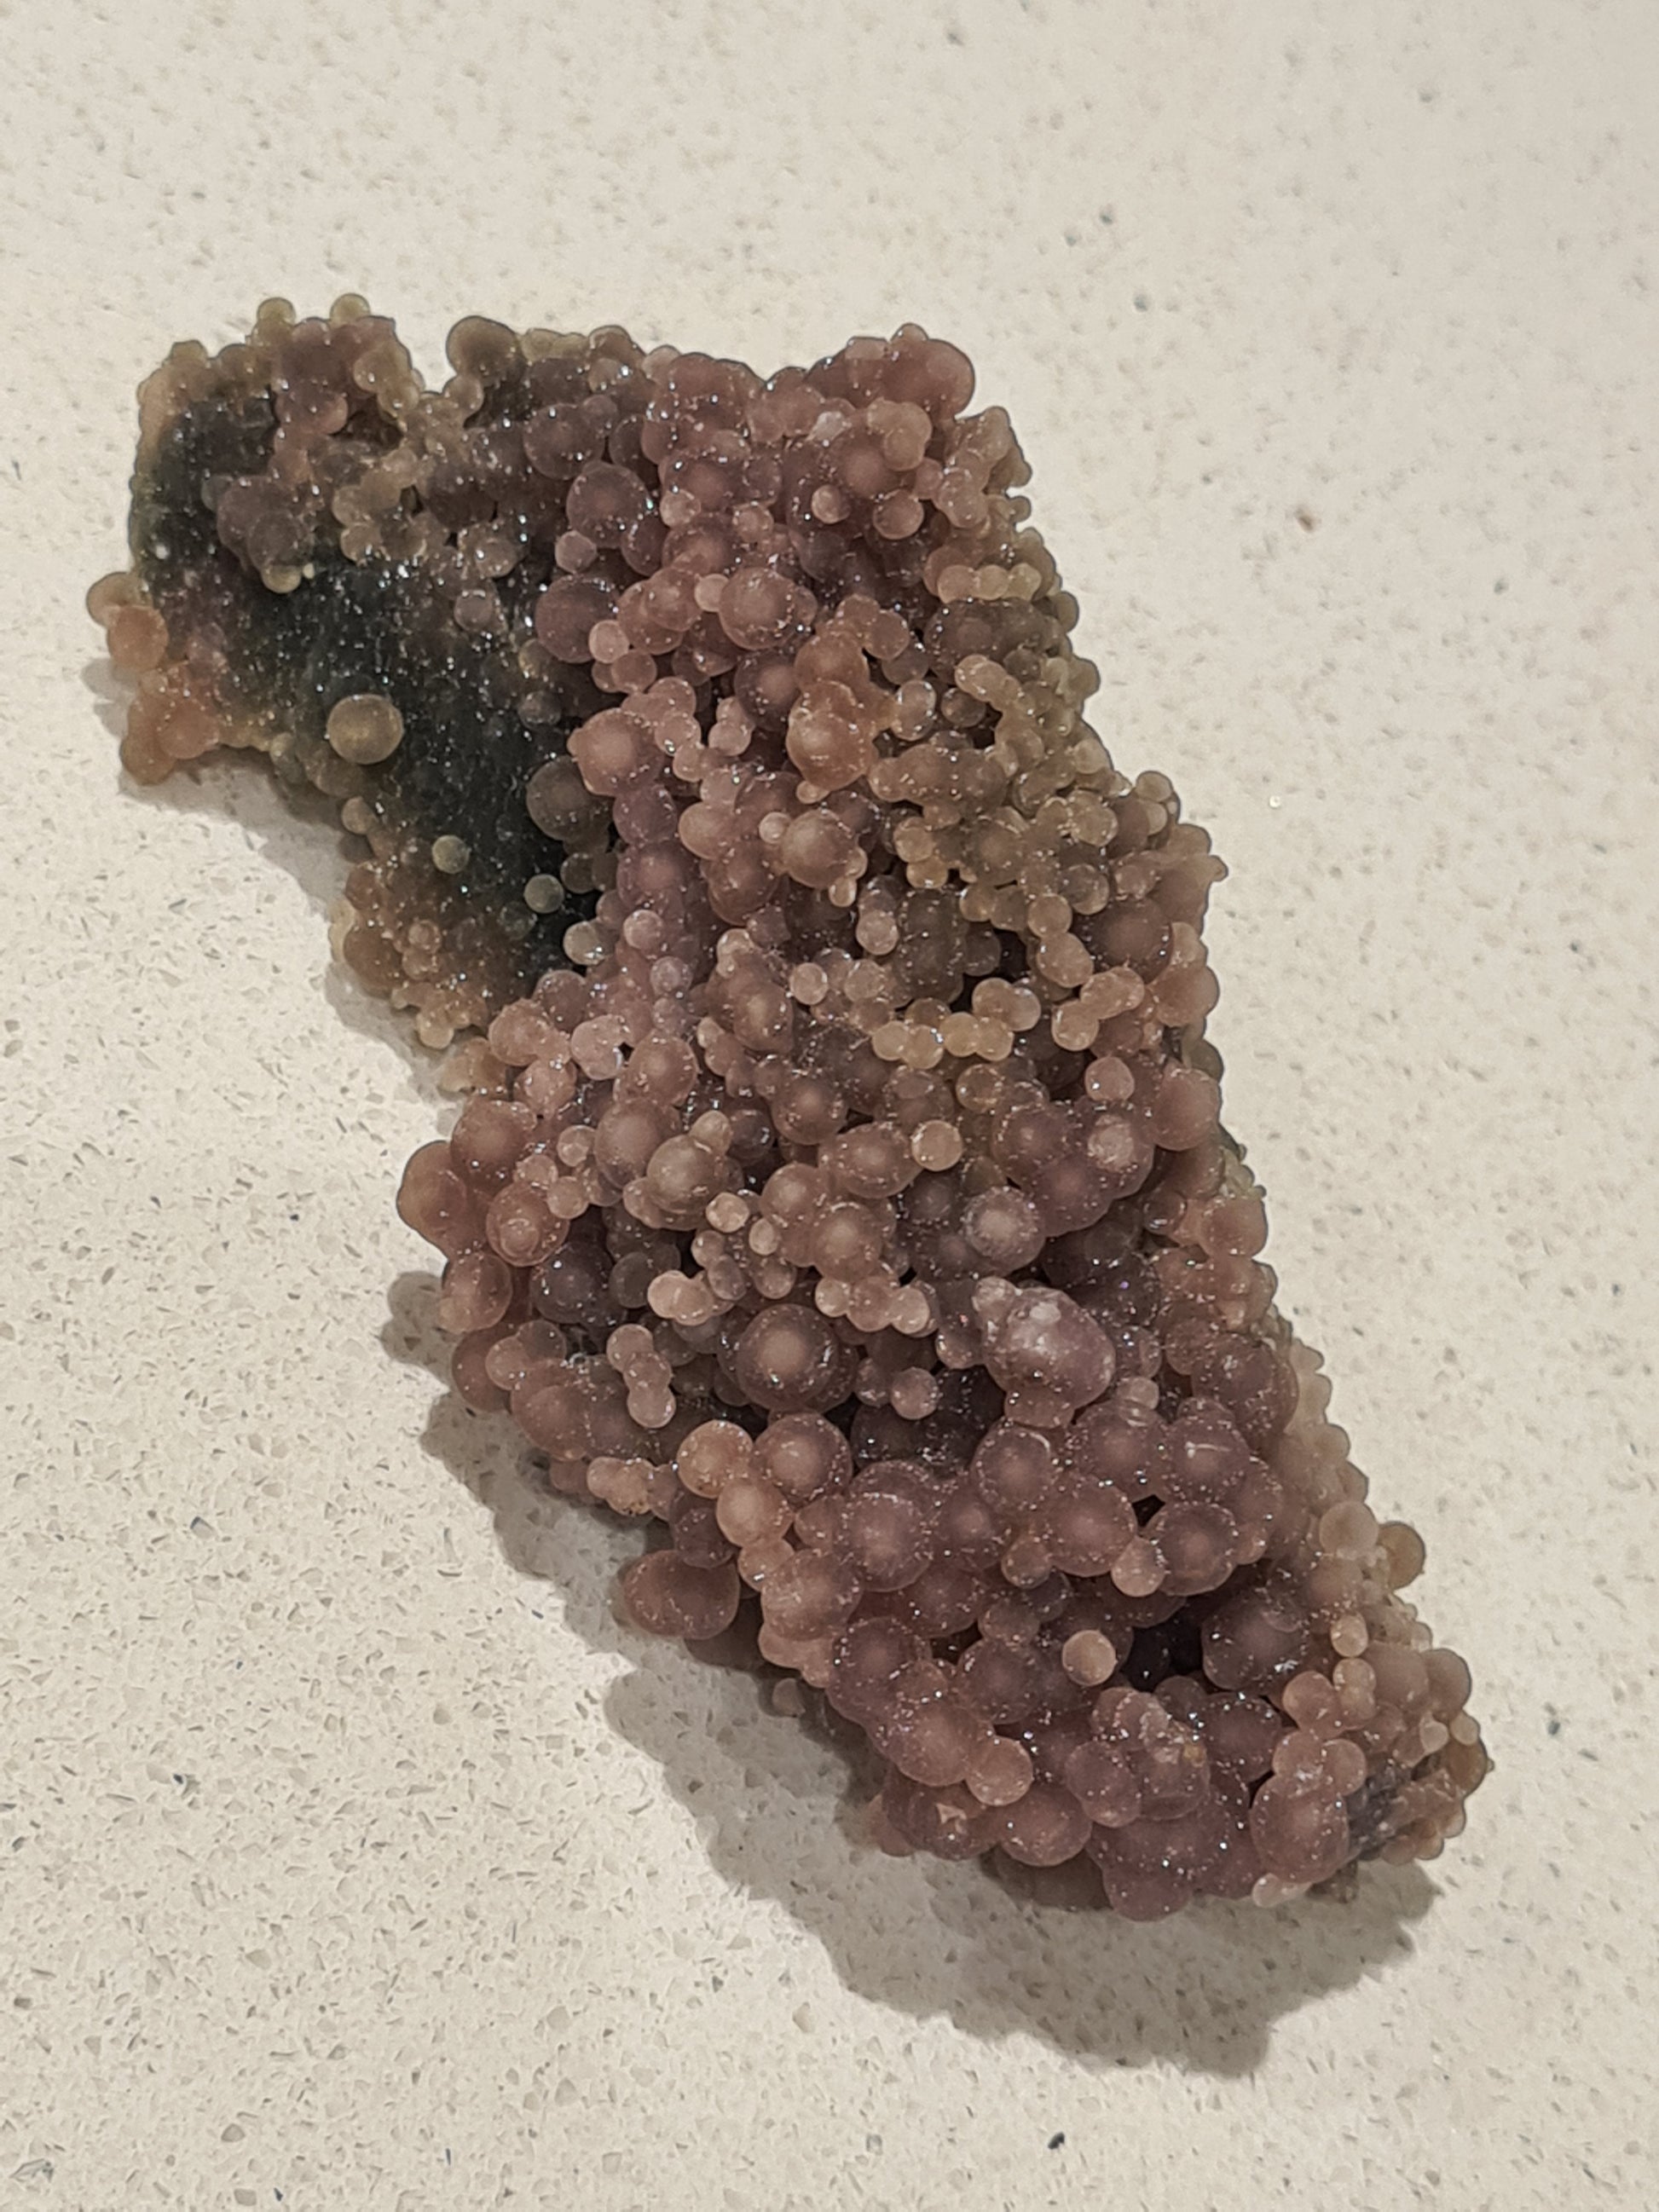 Raw Grape Agate Specimen in Purple and Green. Some of the botroydial 'grape's are translucent so you can see the centre core.